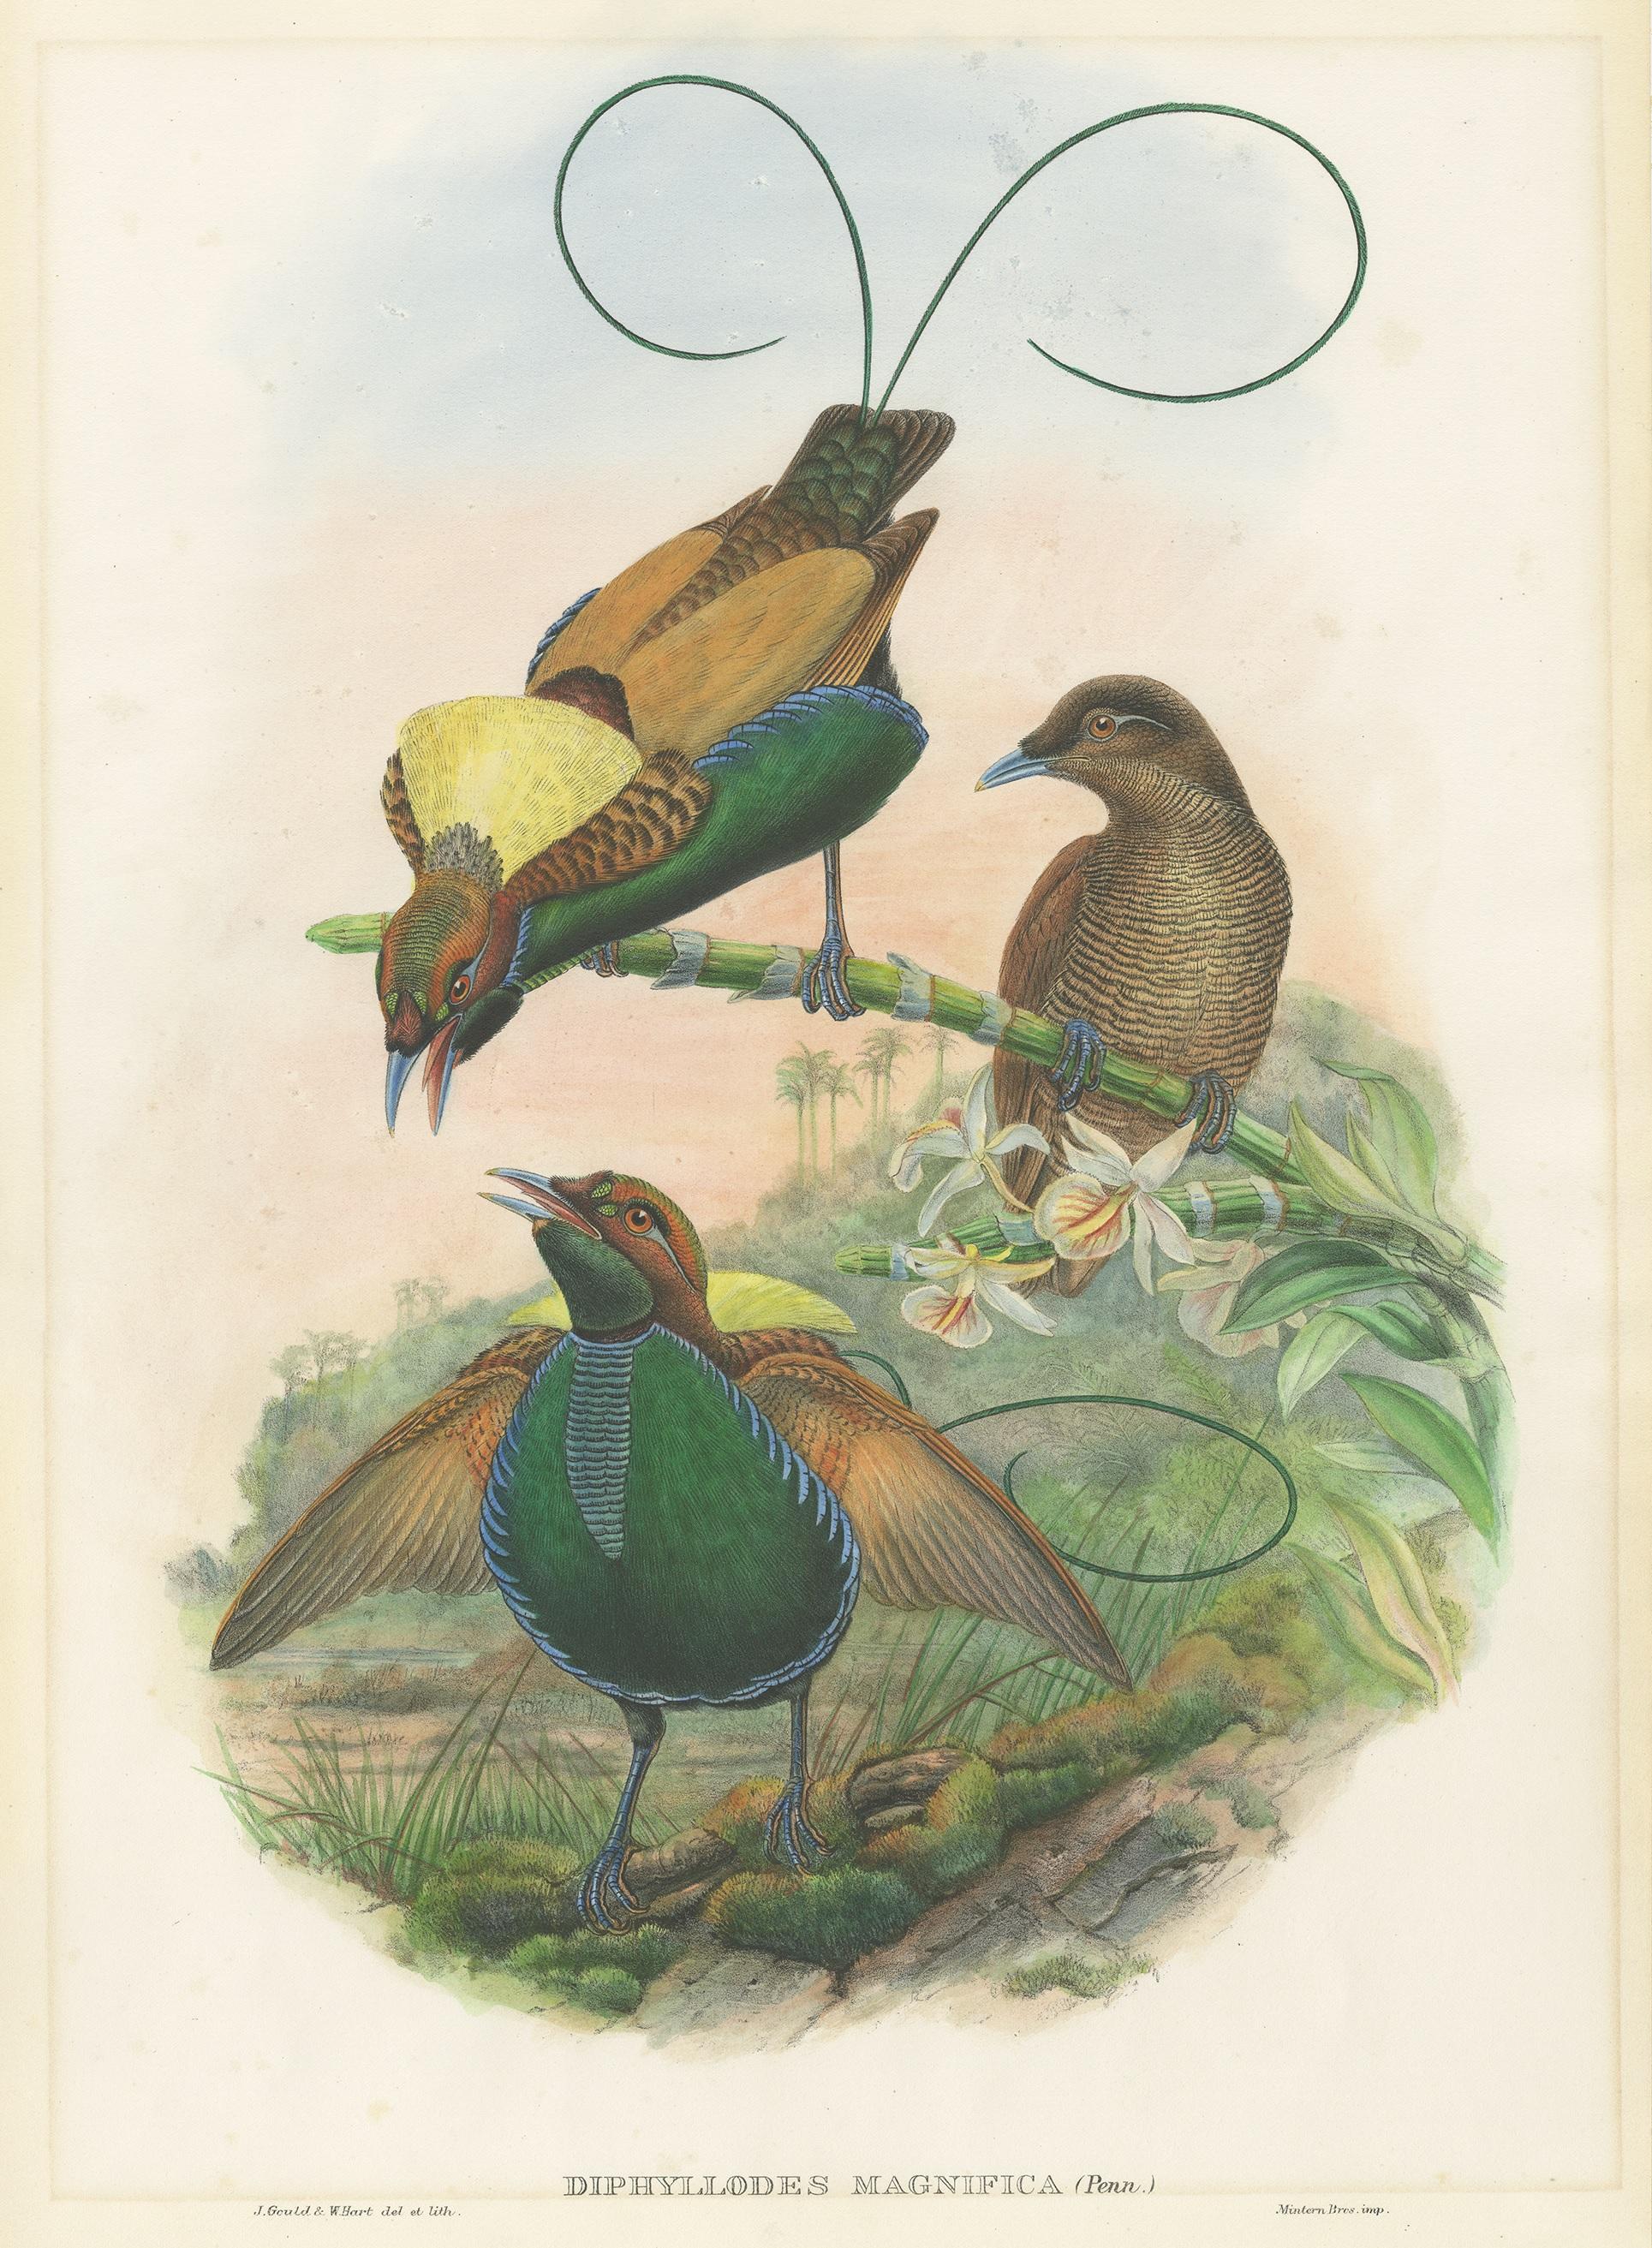 Antique bird print titled 'Diphyllodes Magnifica'. Original lithograph of the magnificent bird of paradise. This print originates from 'Birds of Asia' by John Gould. Published 1850-1853.